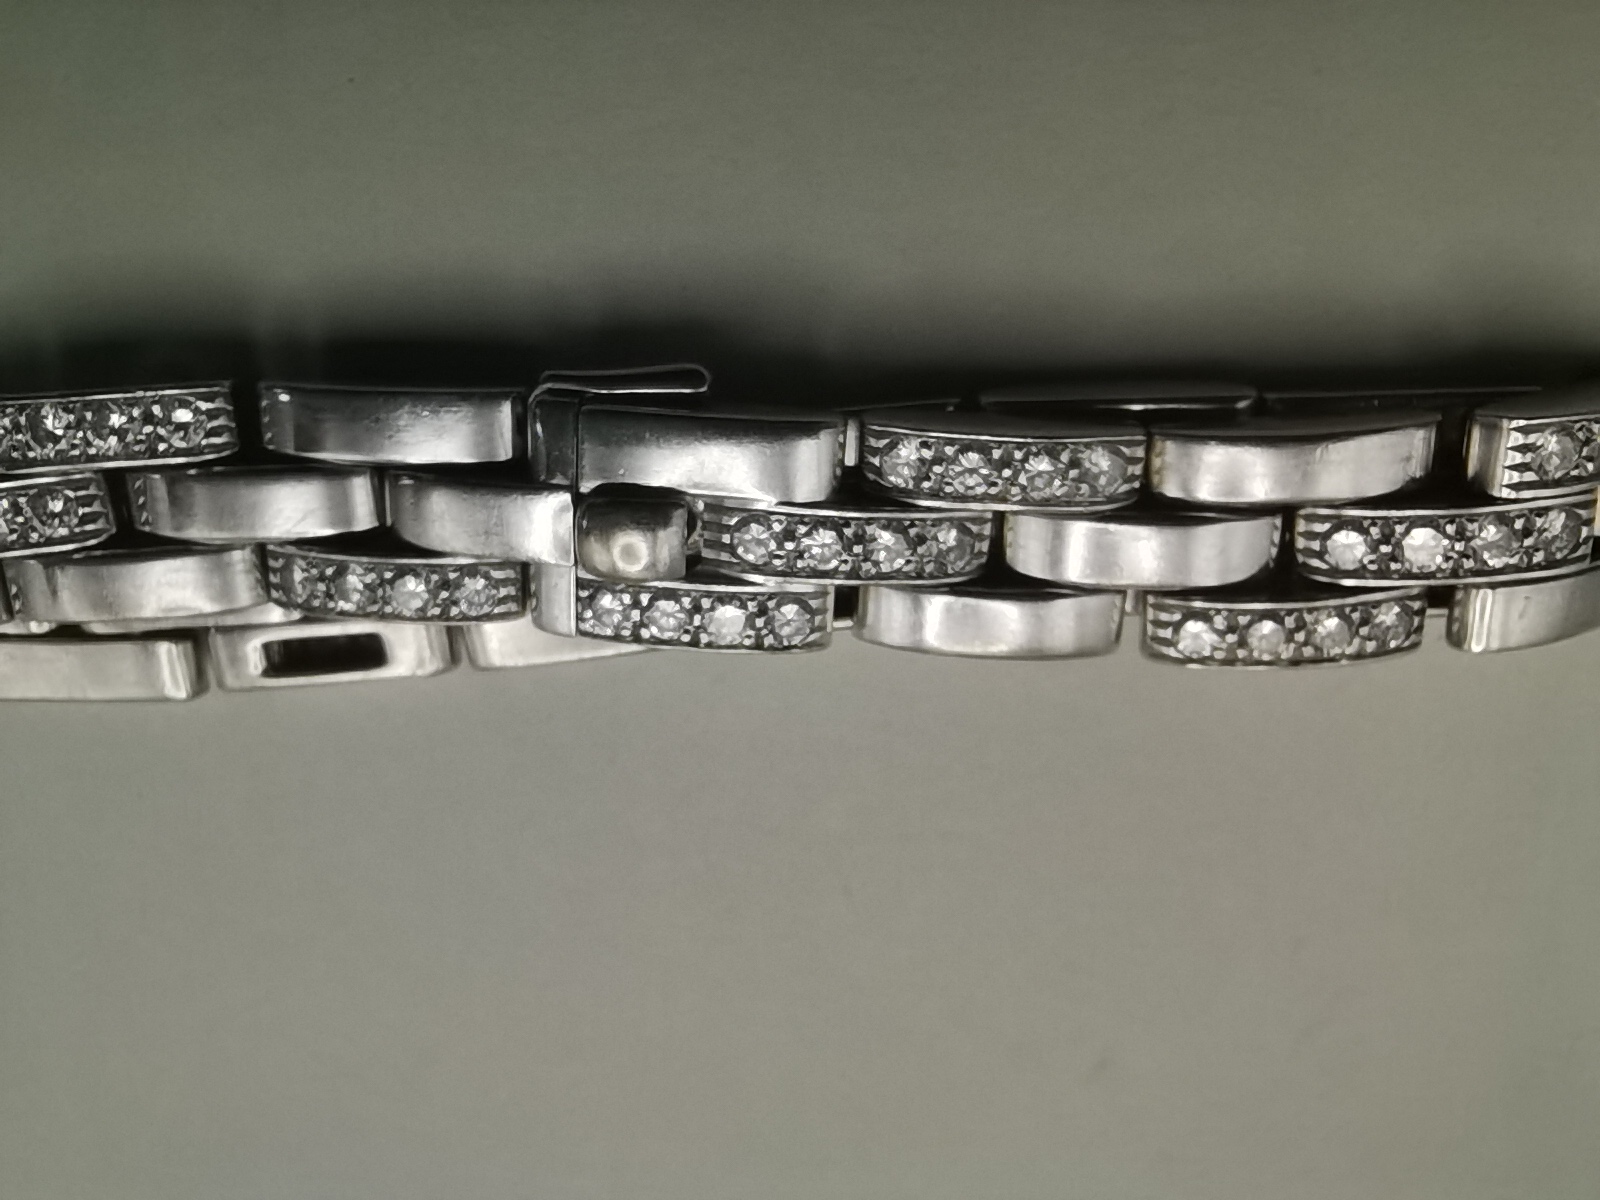 Cartier Maillon Panthere 3 Row Diamond Bracelet in 18 carat White Gold - Image 7 of 9